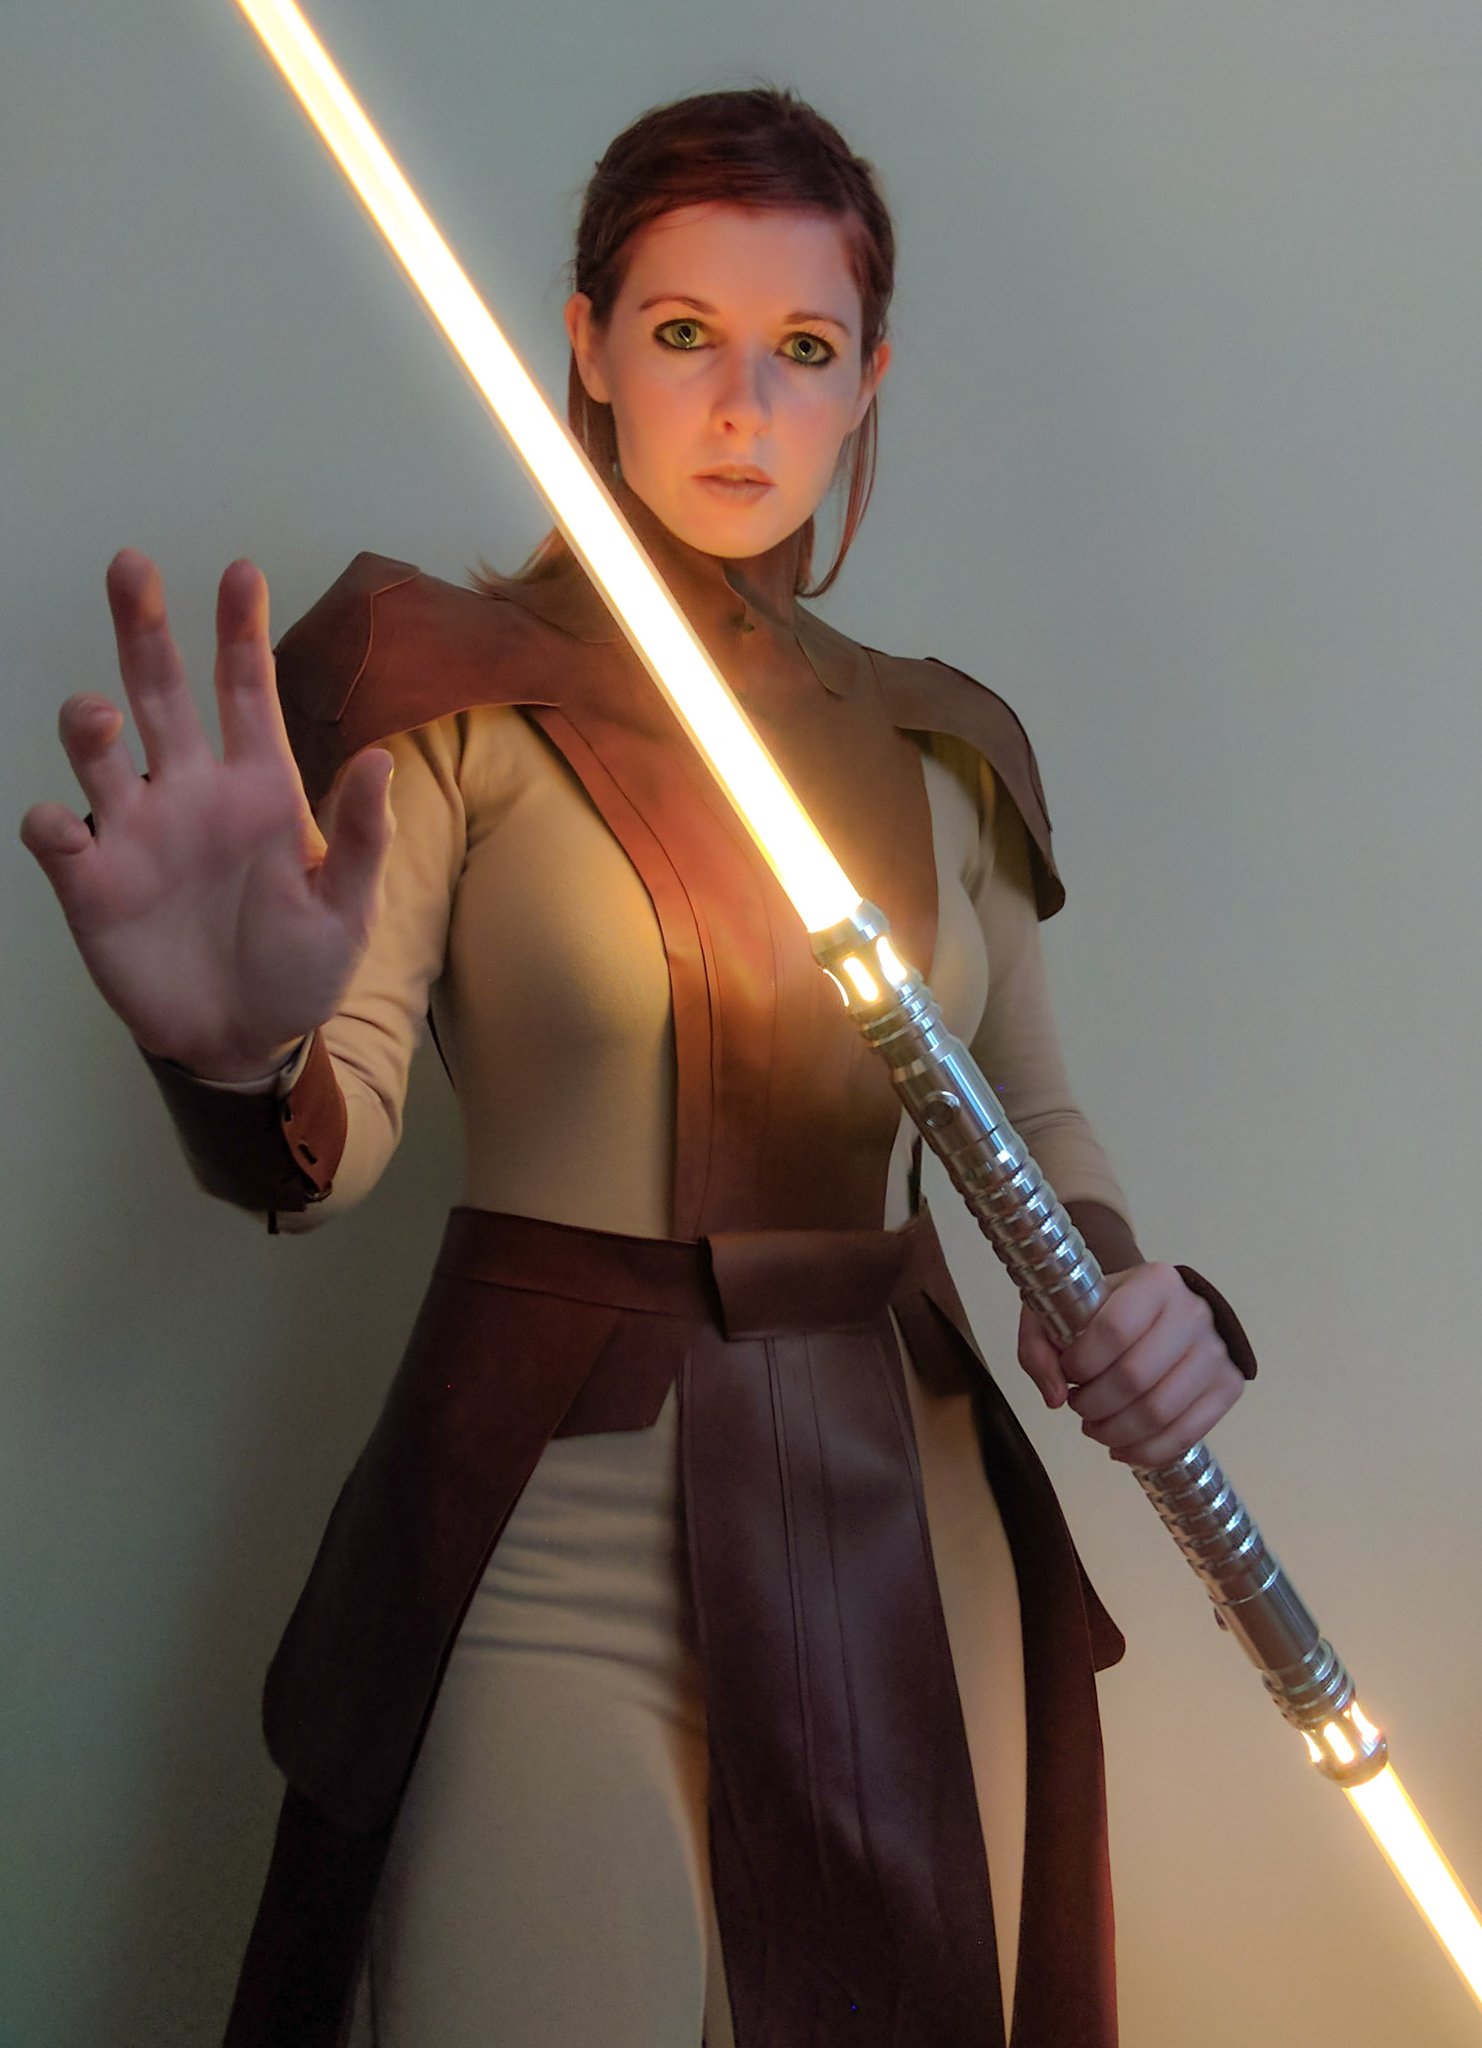 “"I'm Bastila Shan, a member of the Jedi Order and a flee...